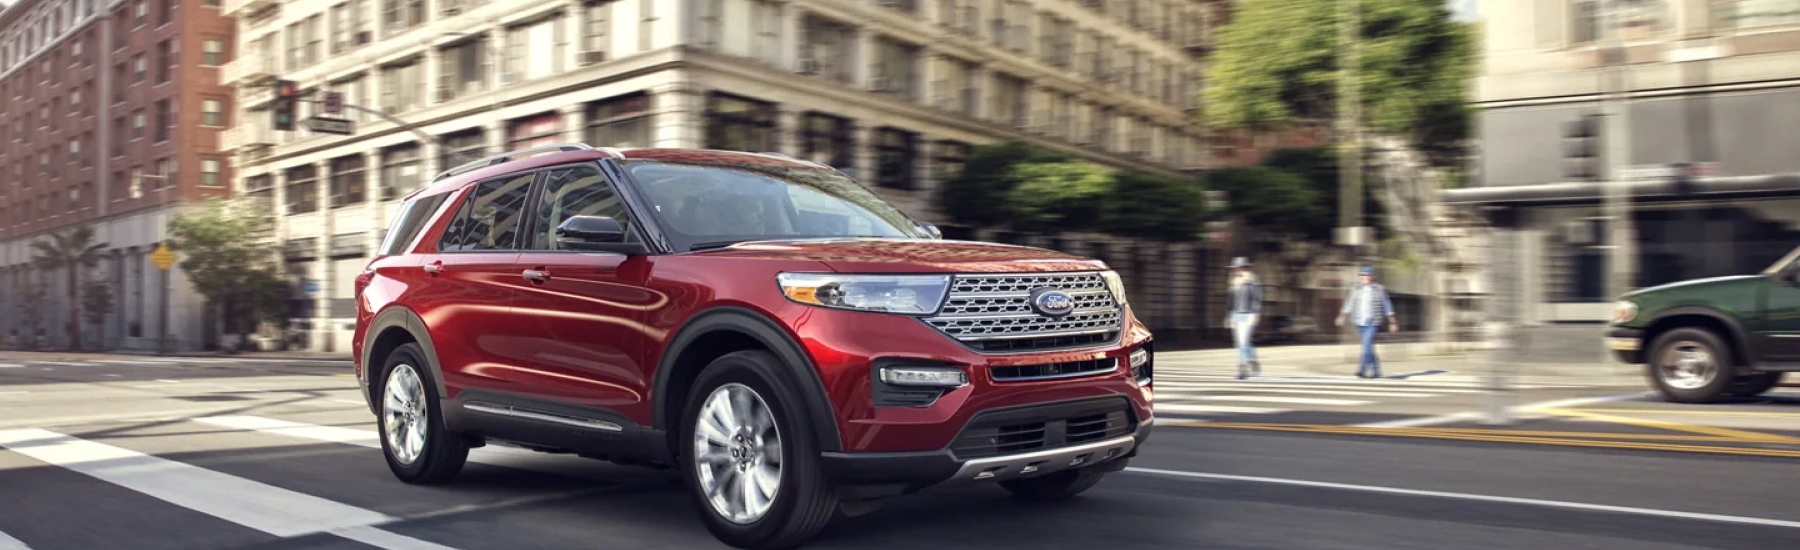 Red 2021 Ford Explorer driving in a city